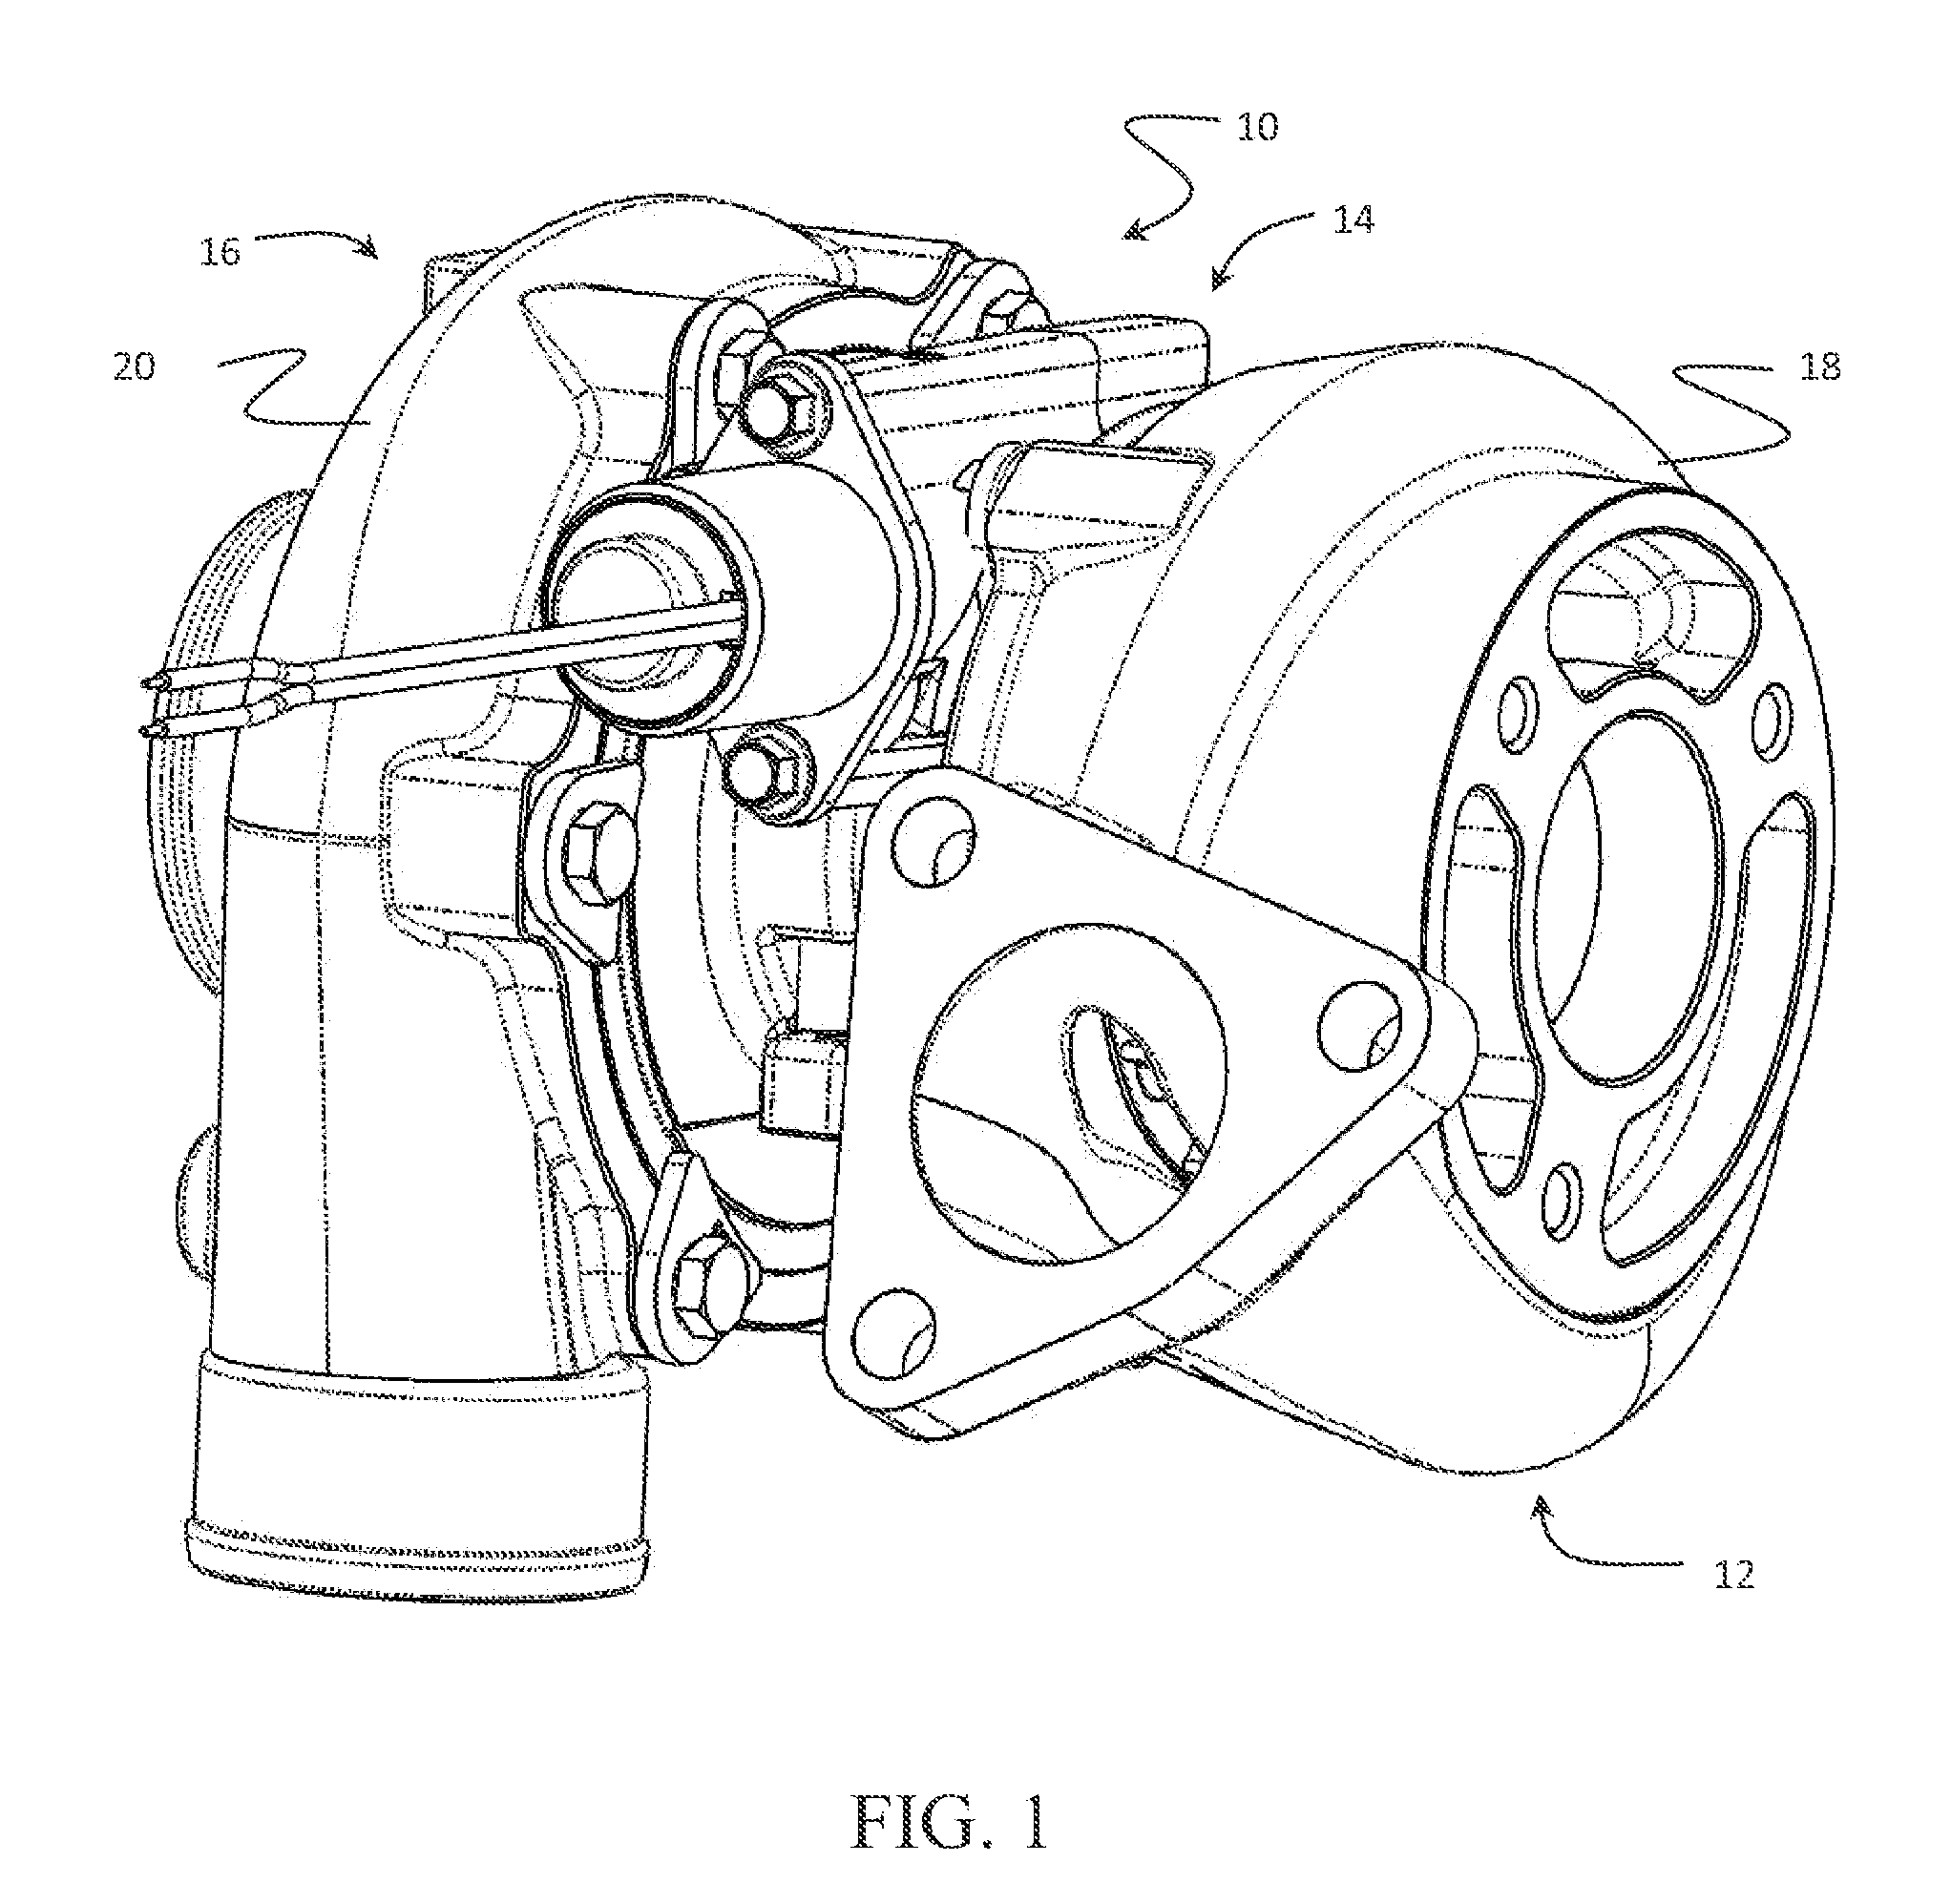 Balanced vanes and integrated actuation system for a variable geometry turbocharger